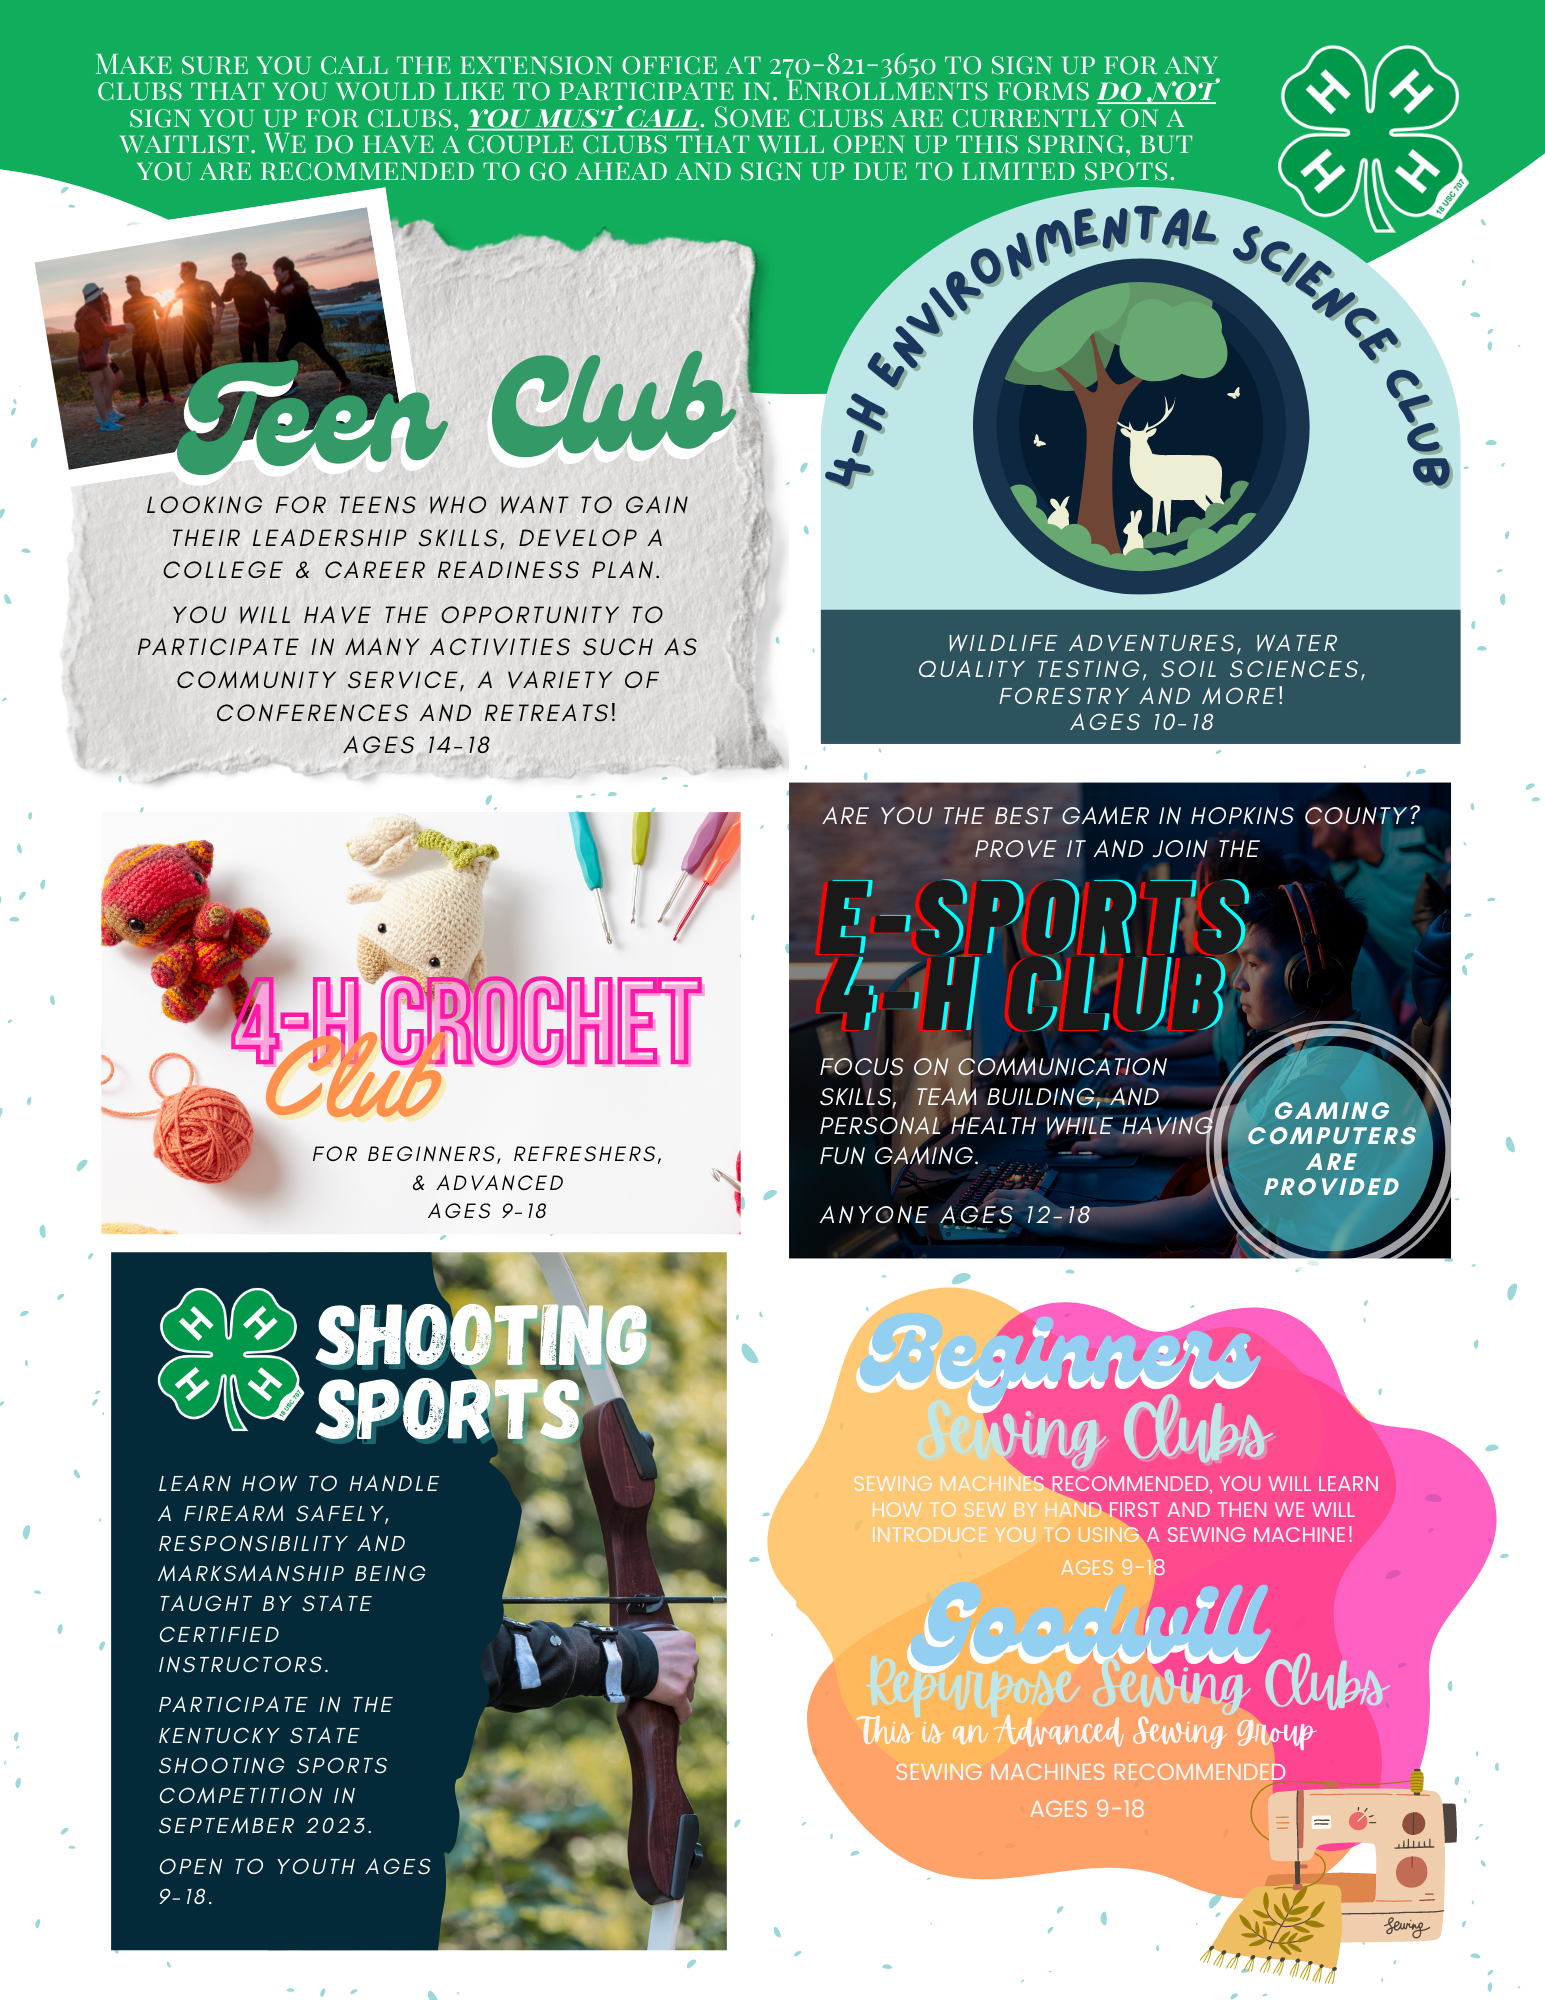 List of all 4-H Clubs